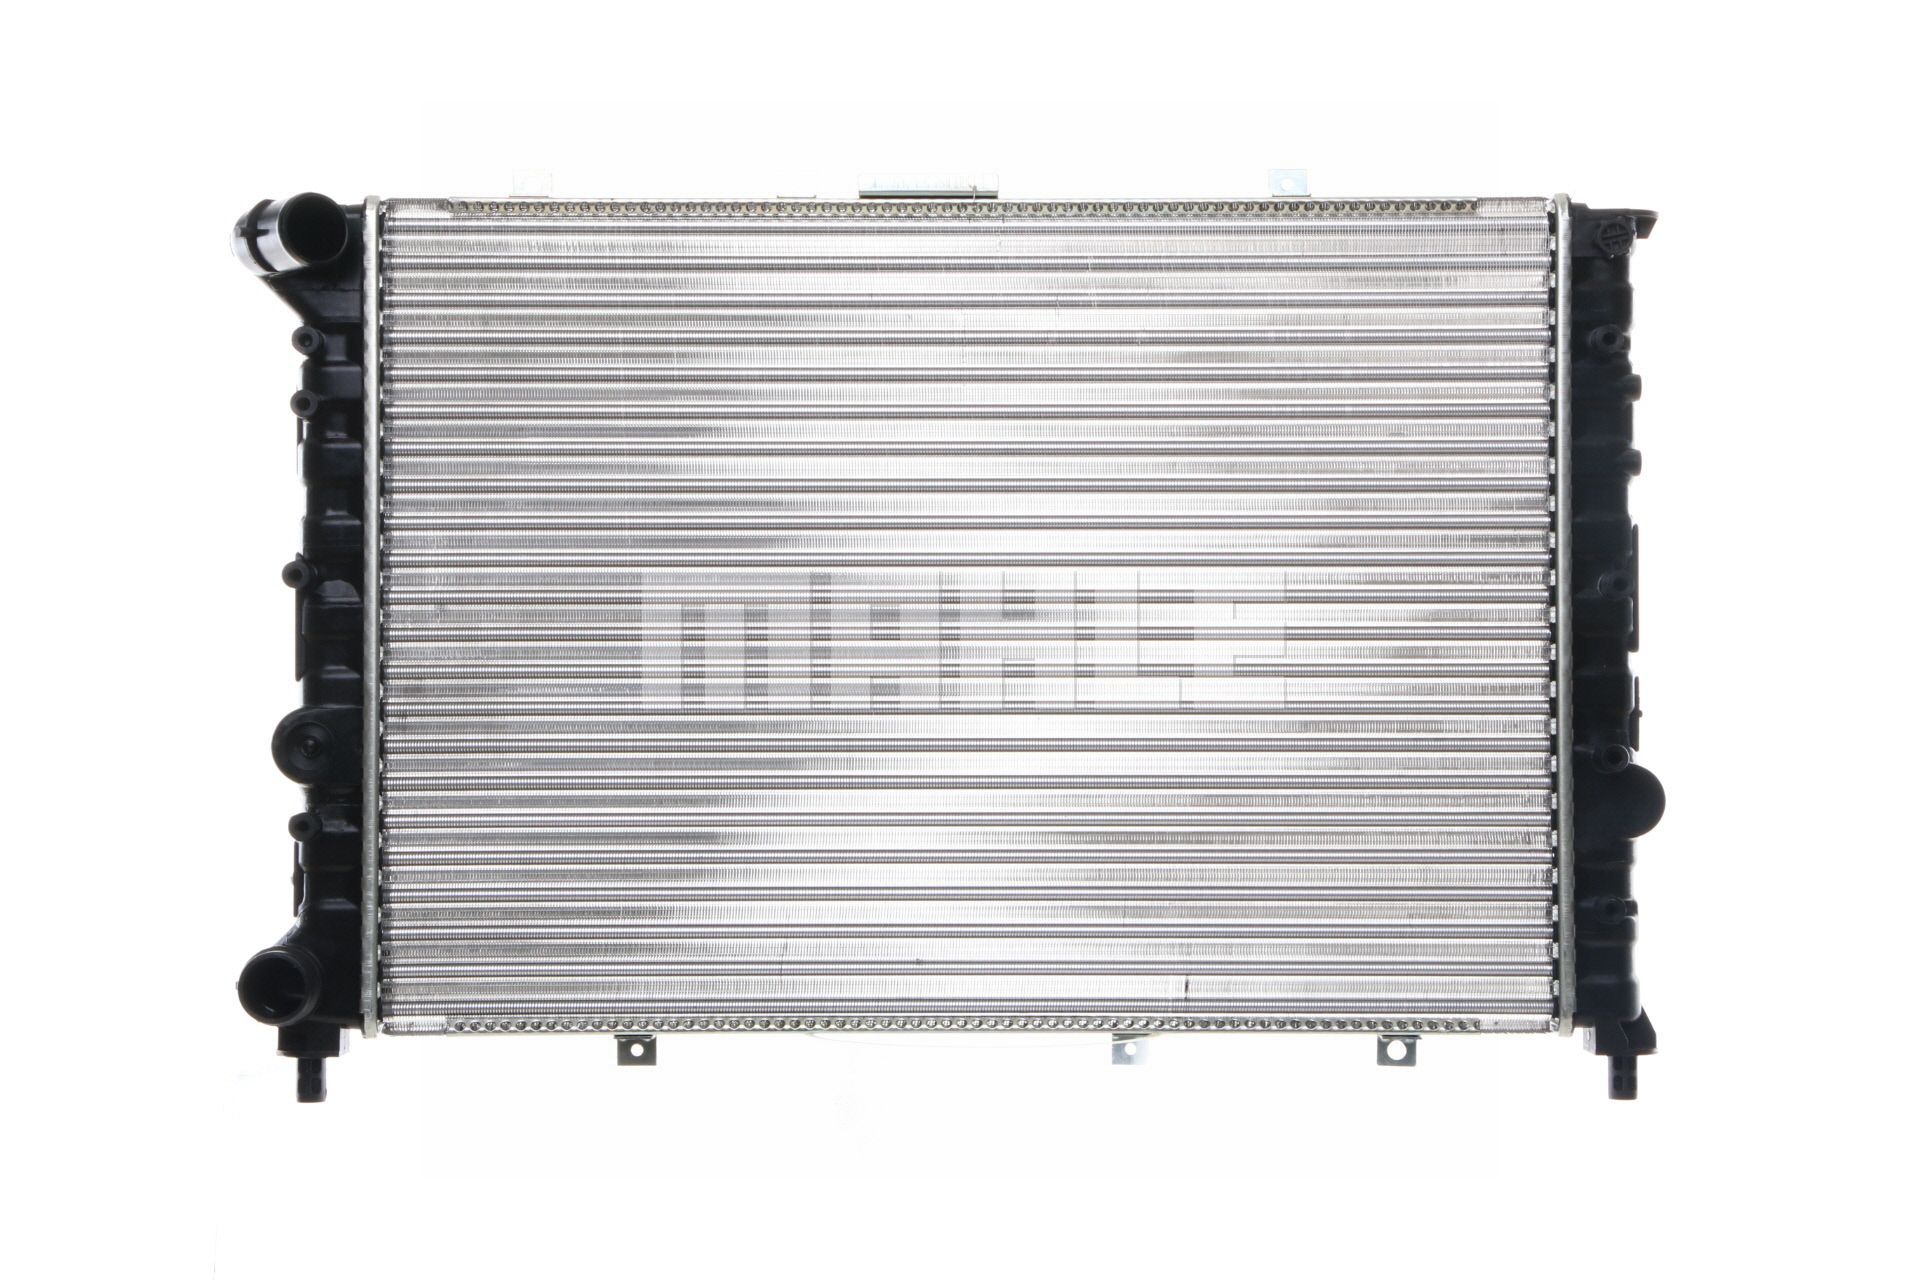 CR 521 000S MAHLE ORIGINAL Radiators ALFA ROMEO for vehicles with air conditioning, 580 x 395 x 24 mm, with screw, Mechanically jointed cooling fins